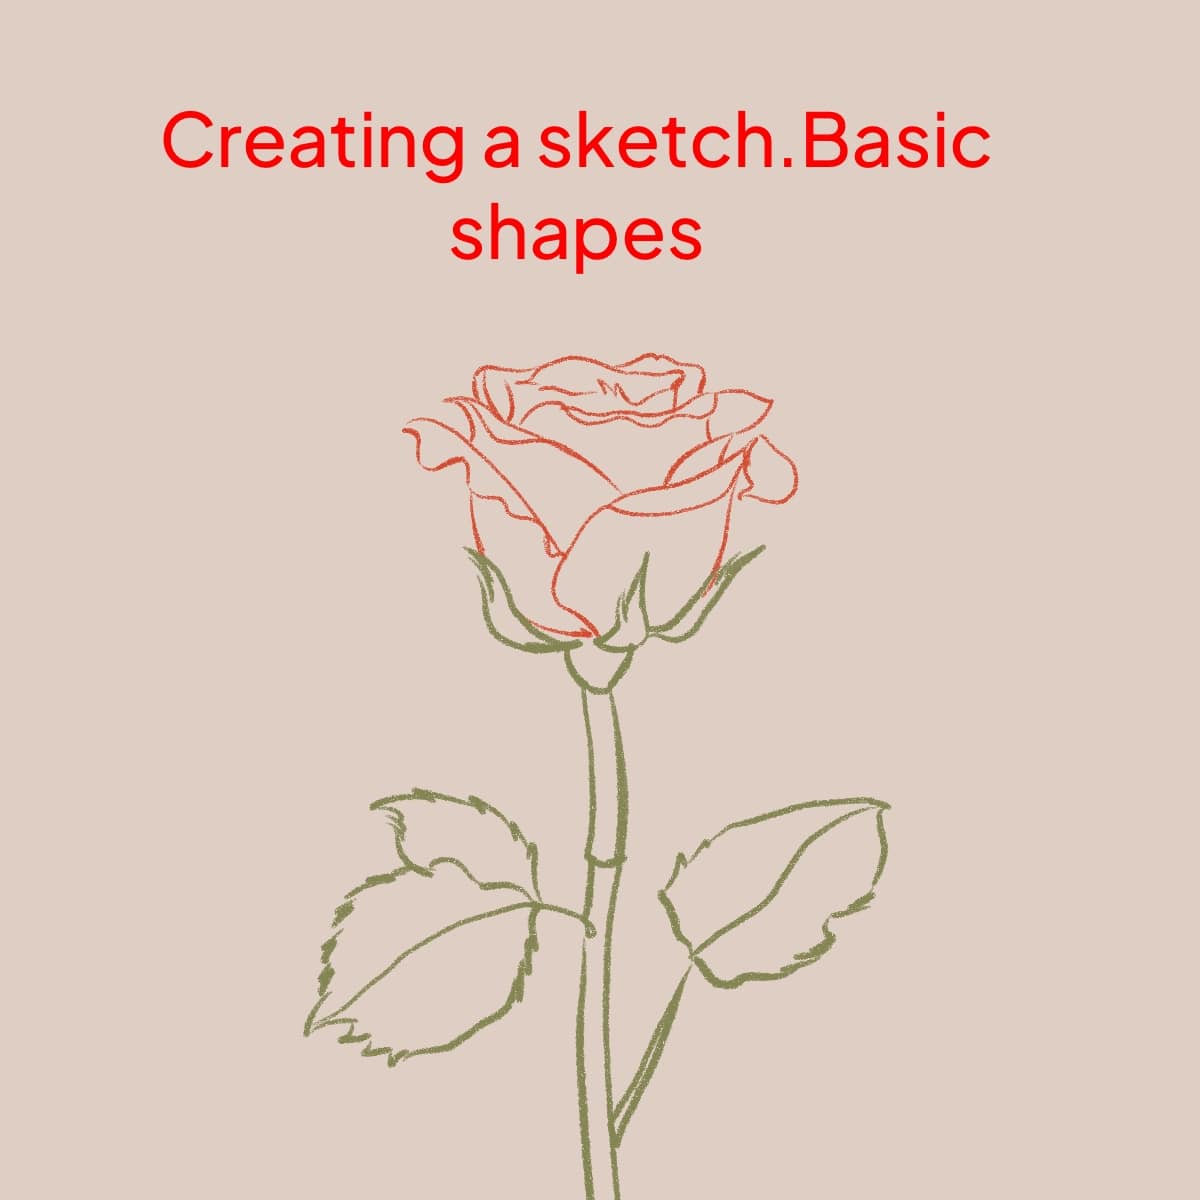 Creating a sketch